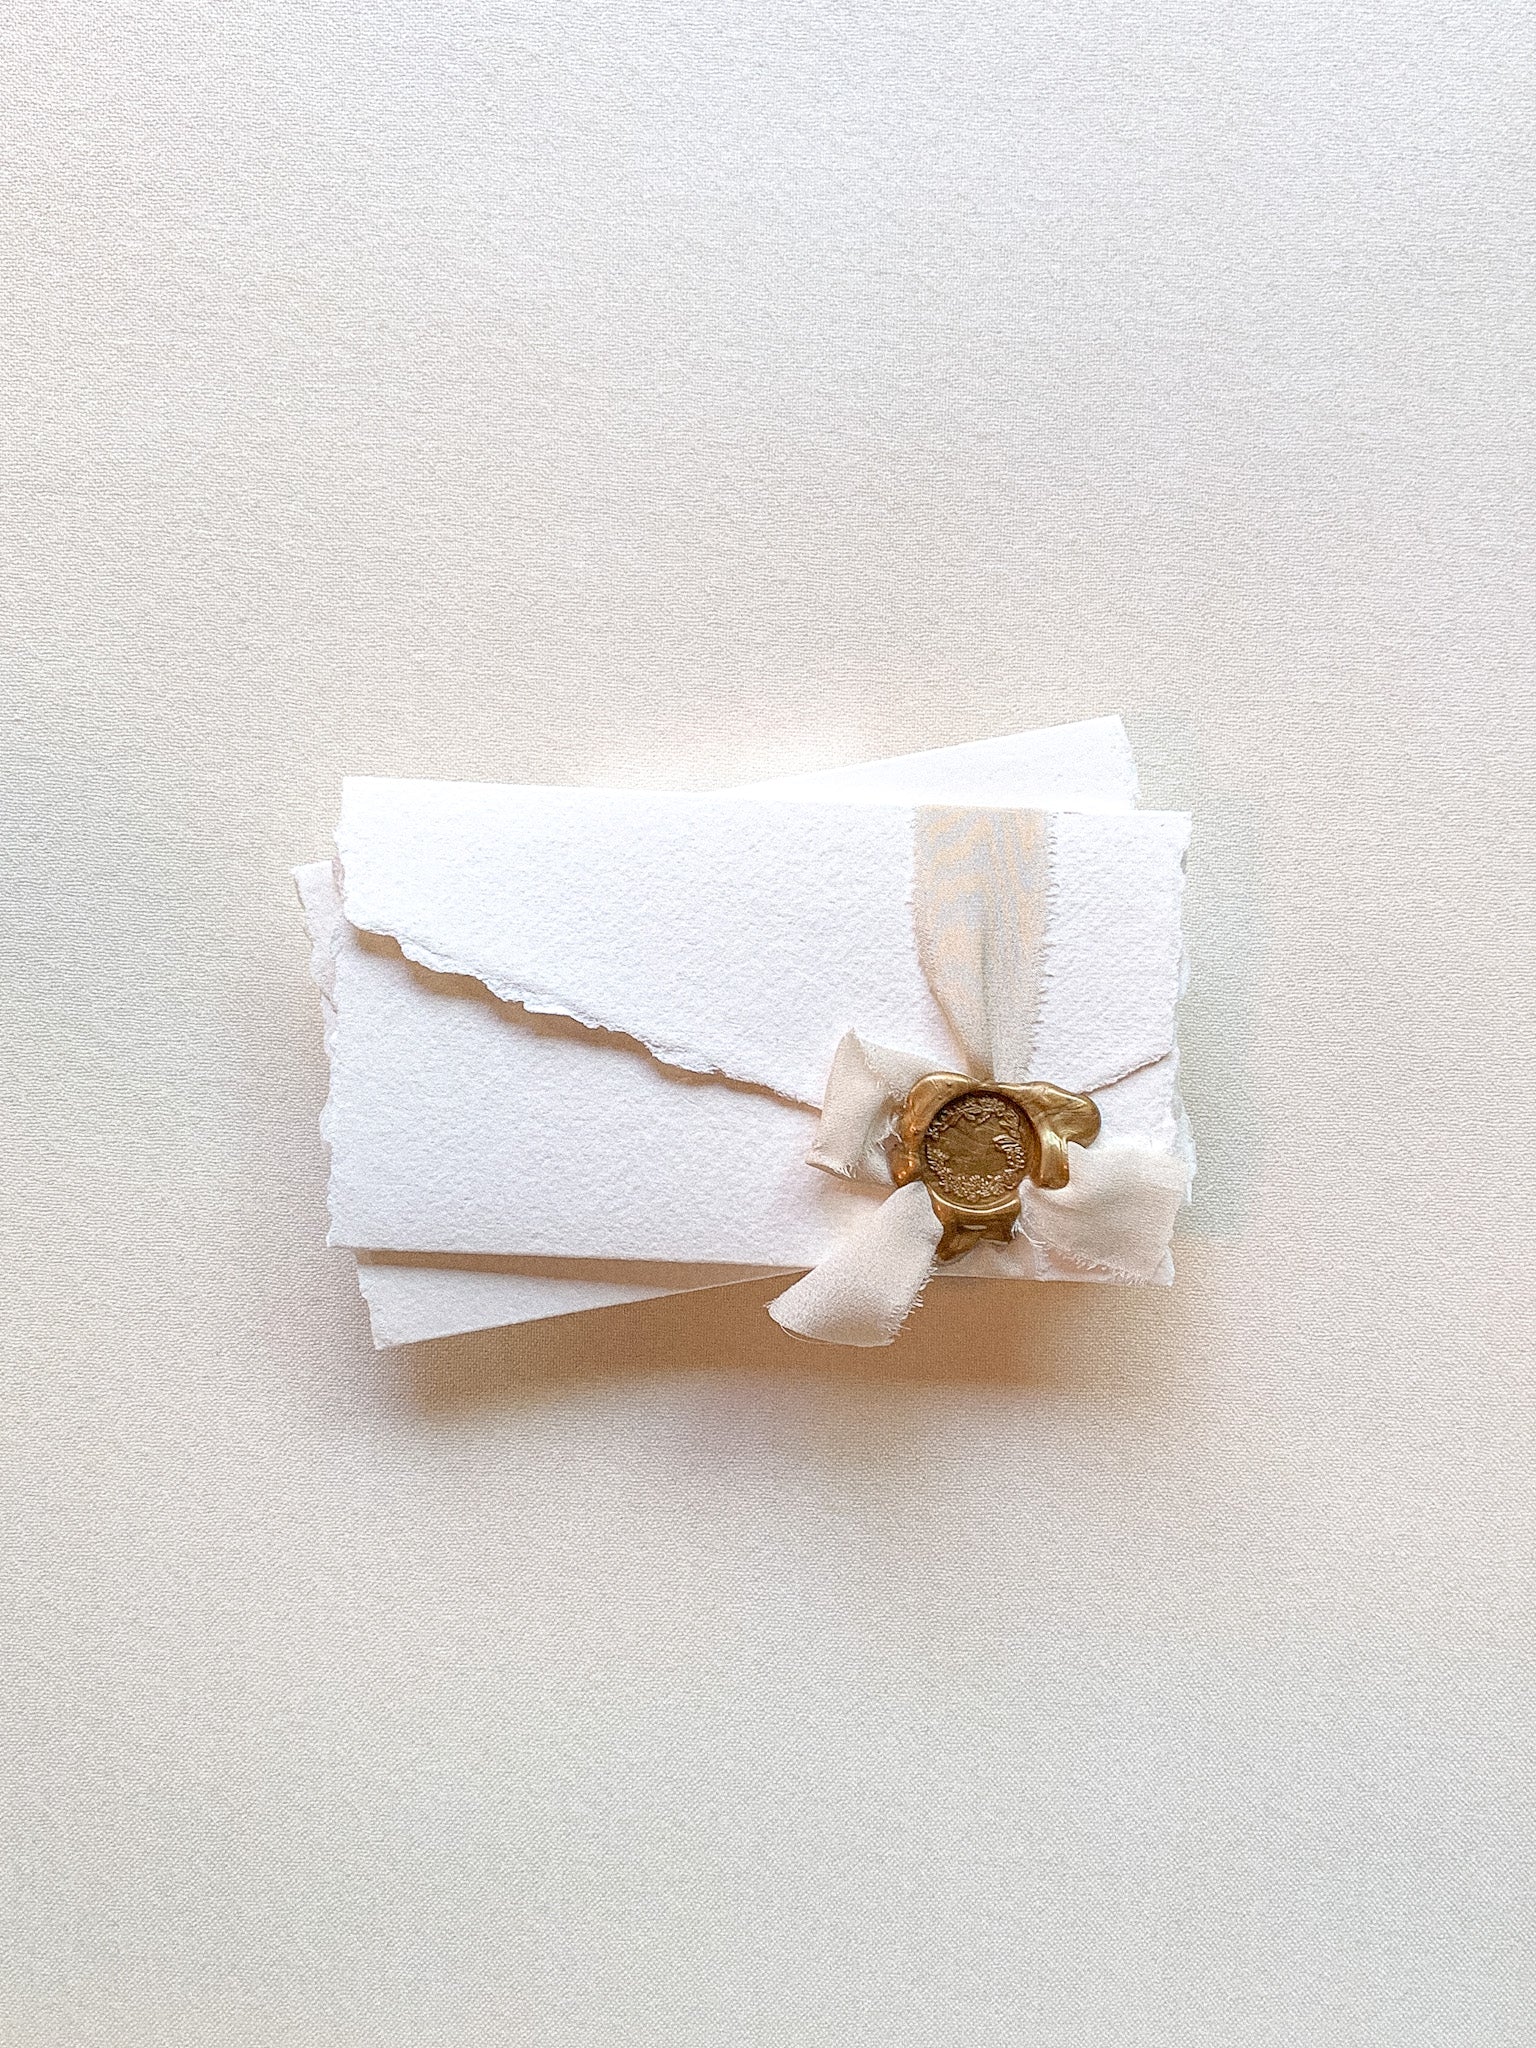 Handmade paper with silk ribbon and wax seal stamp